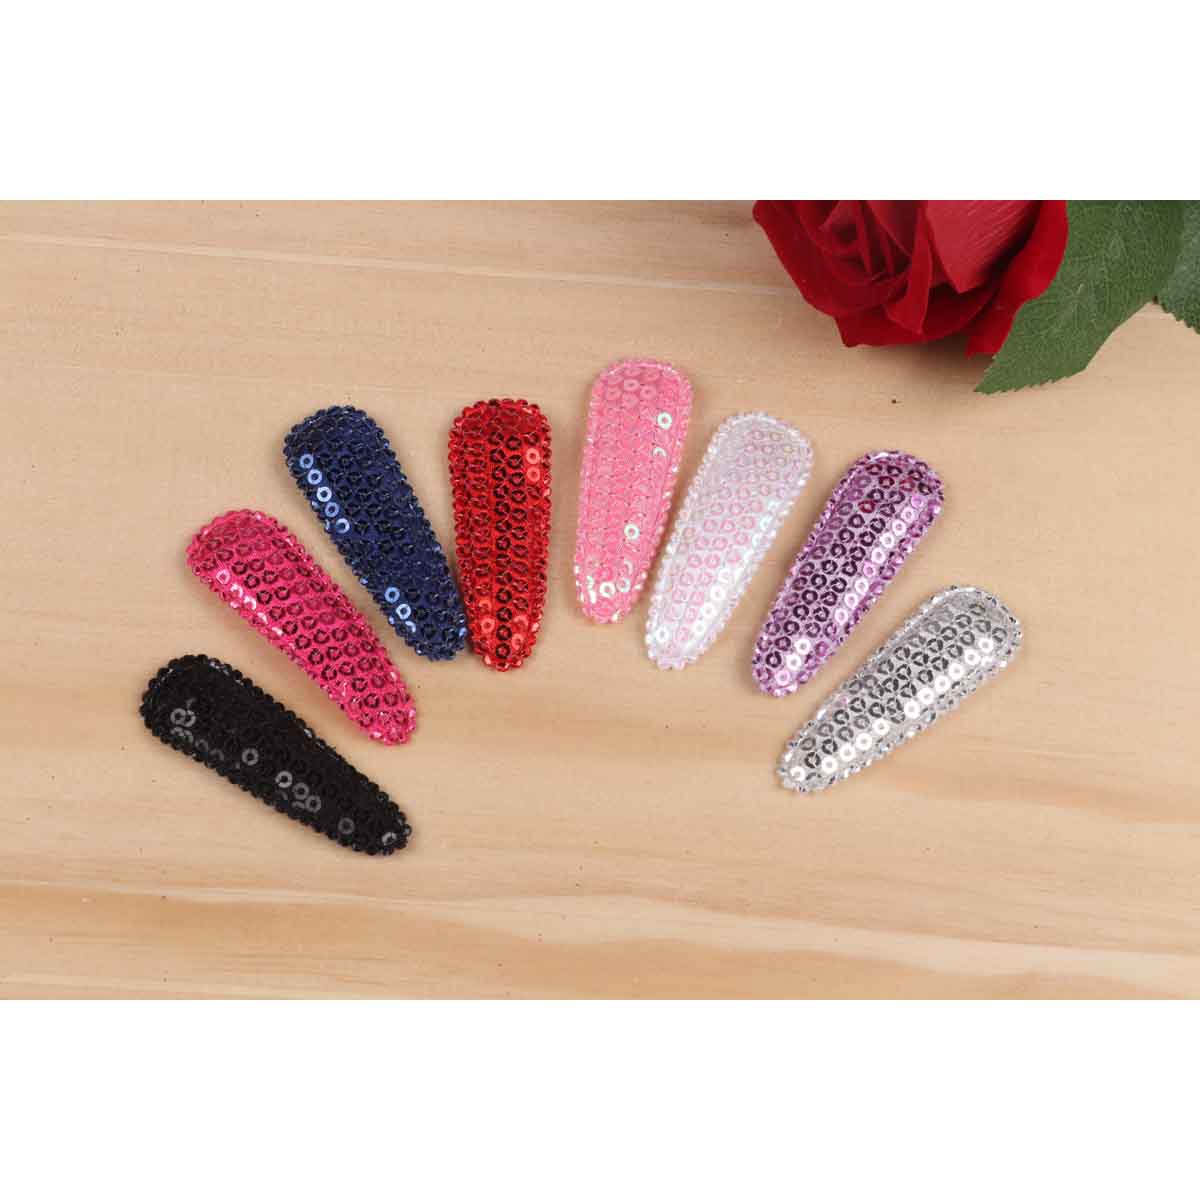 80 Padded Sequin Hair Clip Covers 55mm-8 Colors